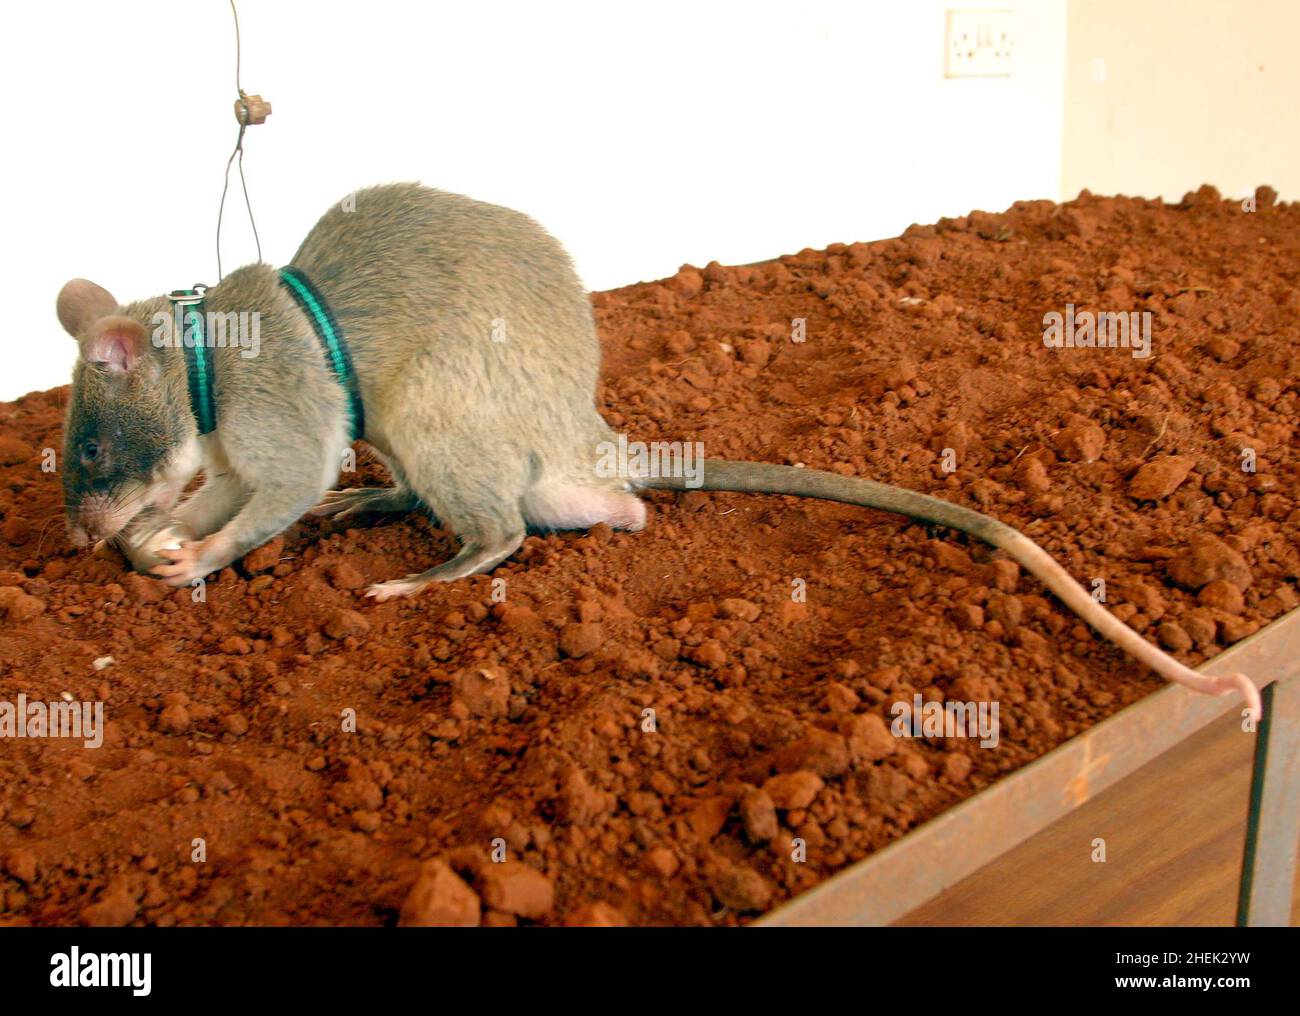 A  RAT UNEARTHS A TNT CAPSULE WHICH HAS BEEN HIDDEN IN SOIL AT THE APOPO TRAINING CENTRE, SOKOINE UNIVERSITY OF AGRICULTURE, MOROGORO, TANZANIA. AT THE CENTRE THE BELGIUM COMPANY (APOPO), THE BRAINCHILD OF BART WEETJENS, IS TRAINING RATS TO DETECT LANDMINES FOR USE IN WAR TORN REGIONS. Stock Photo